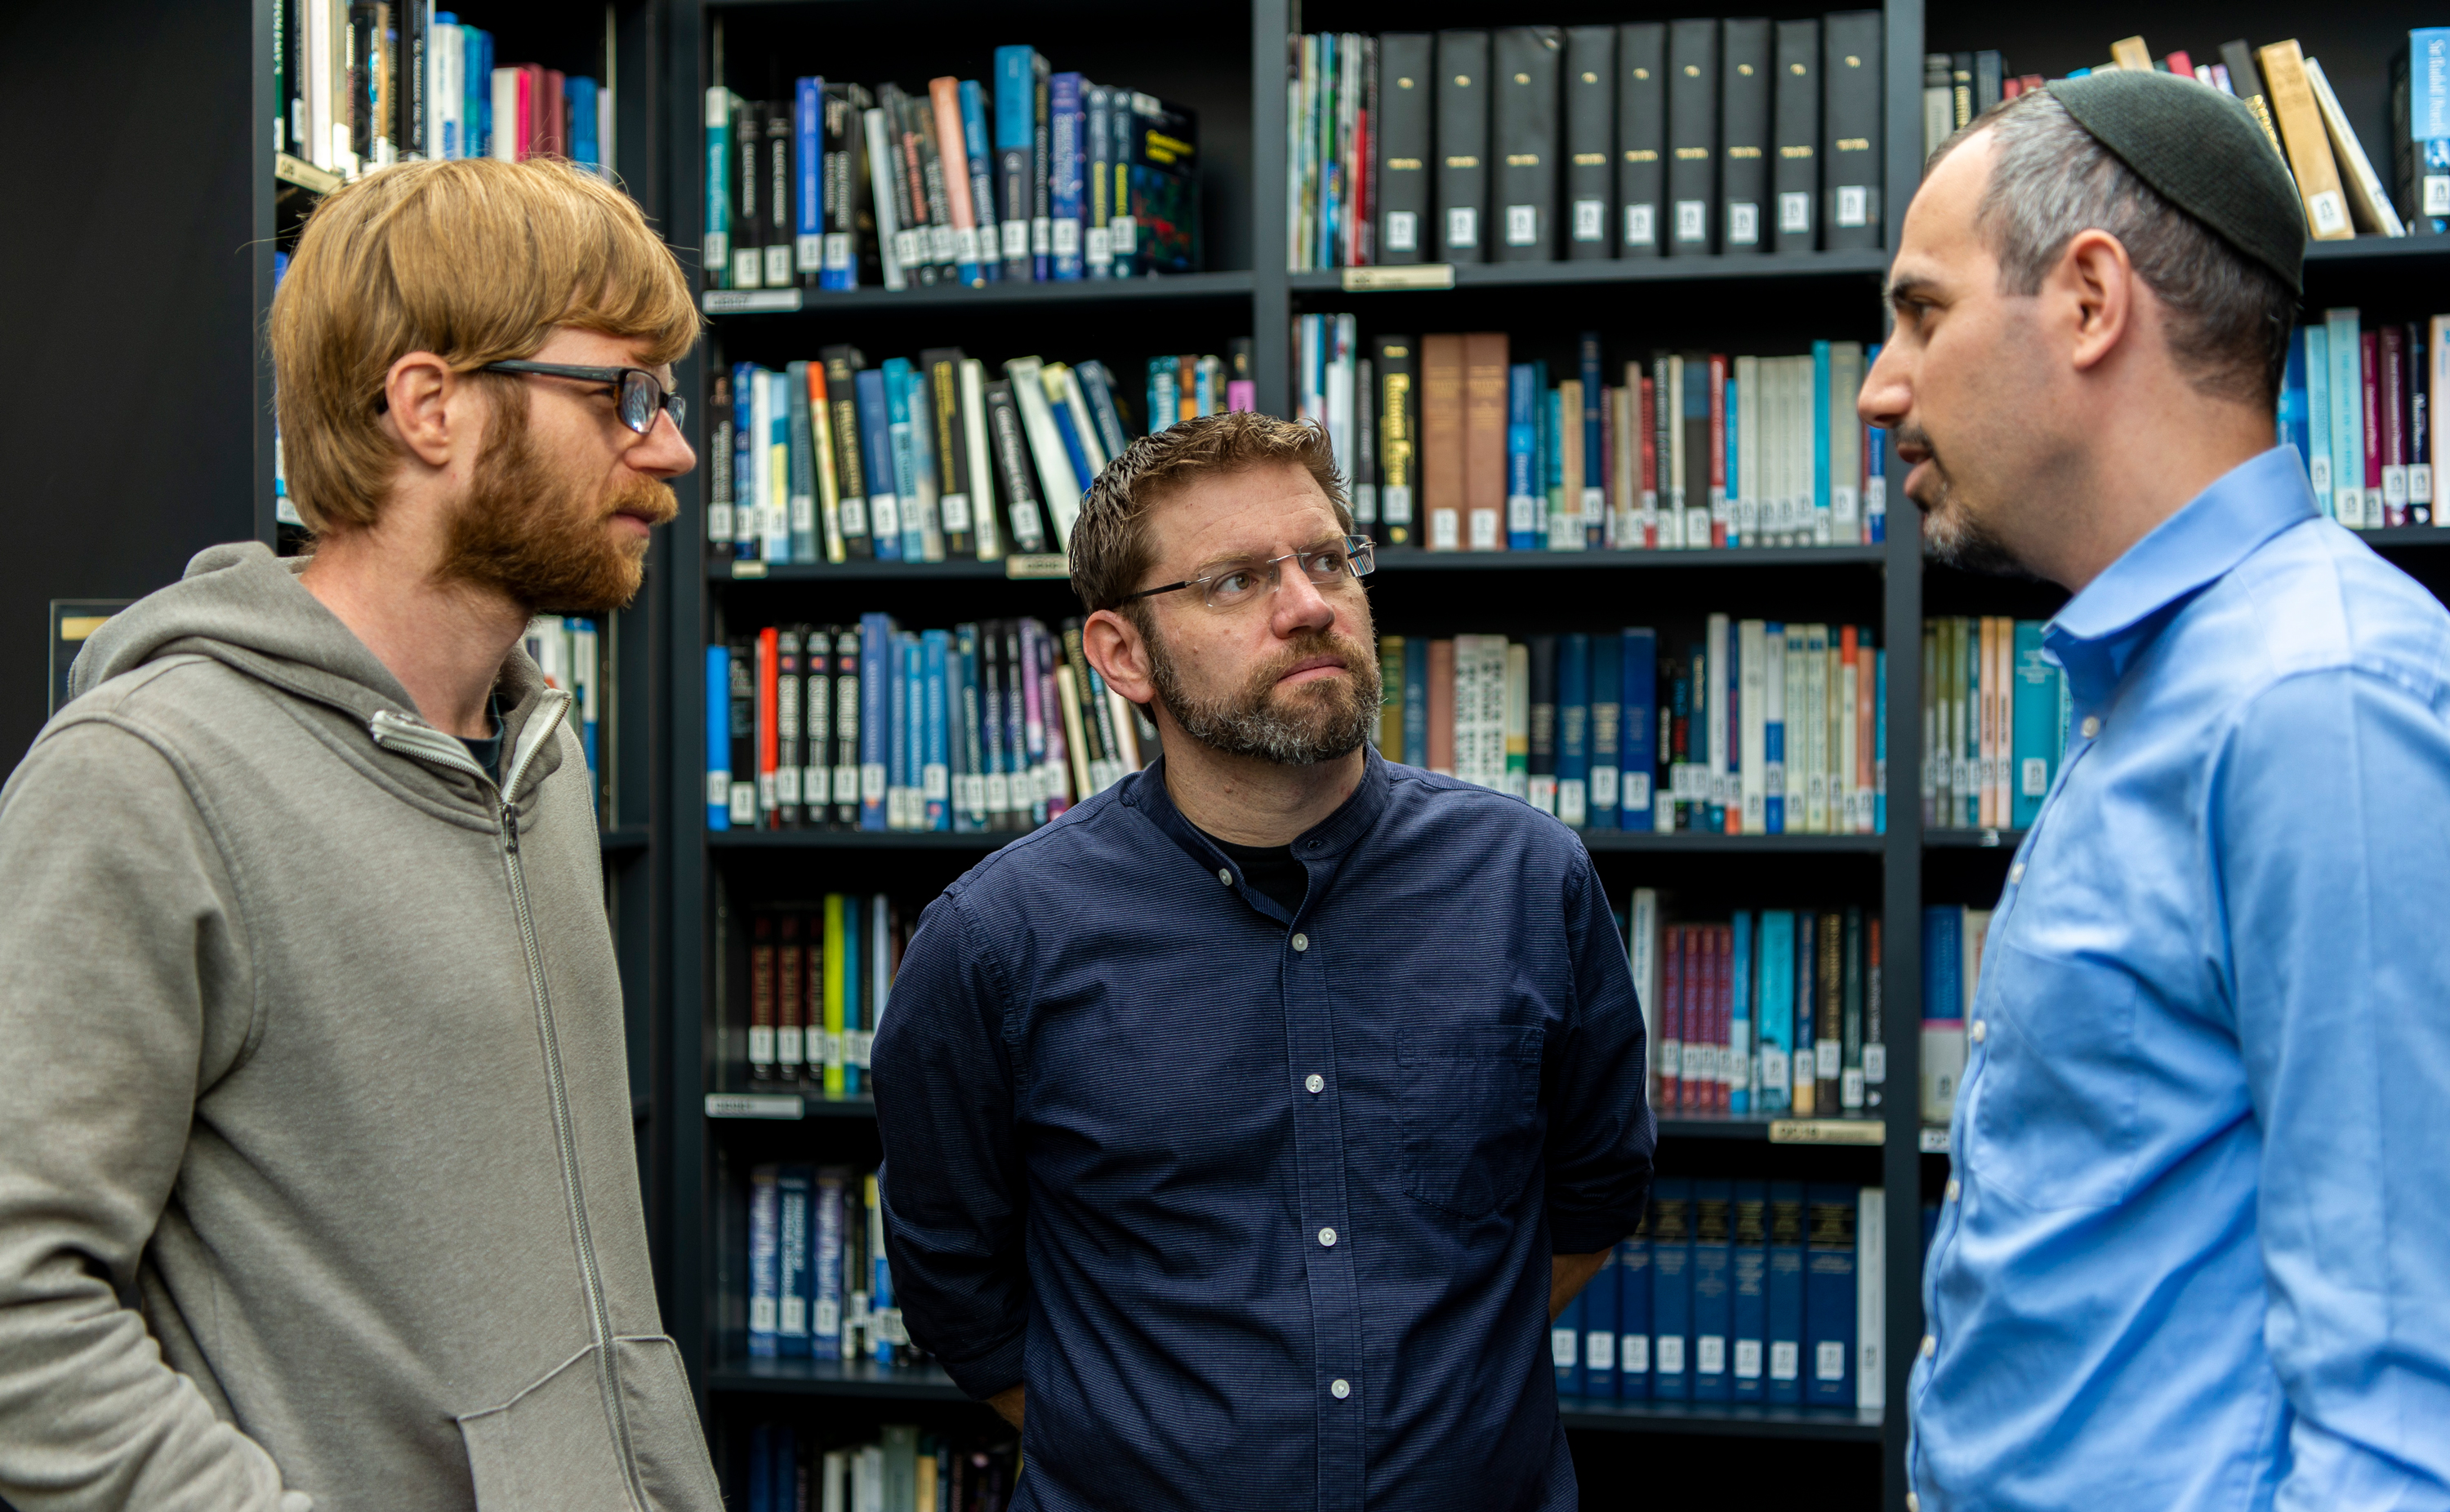 Three men standing in a library having a conversation together